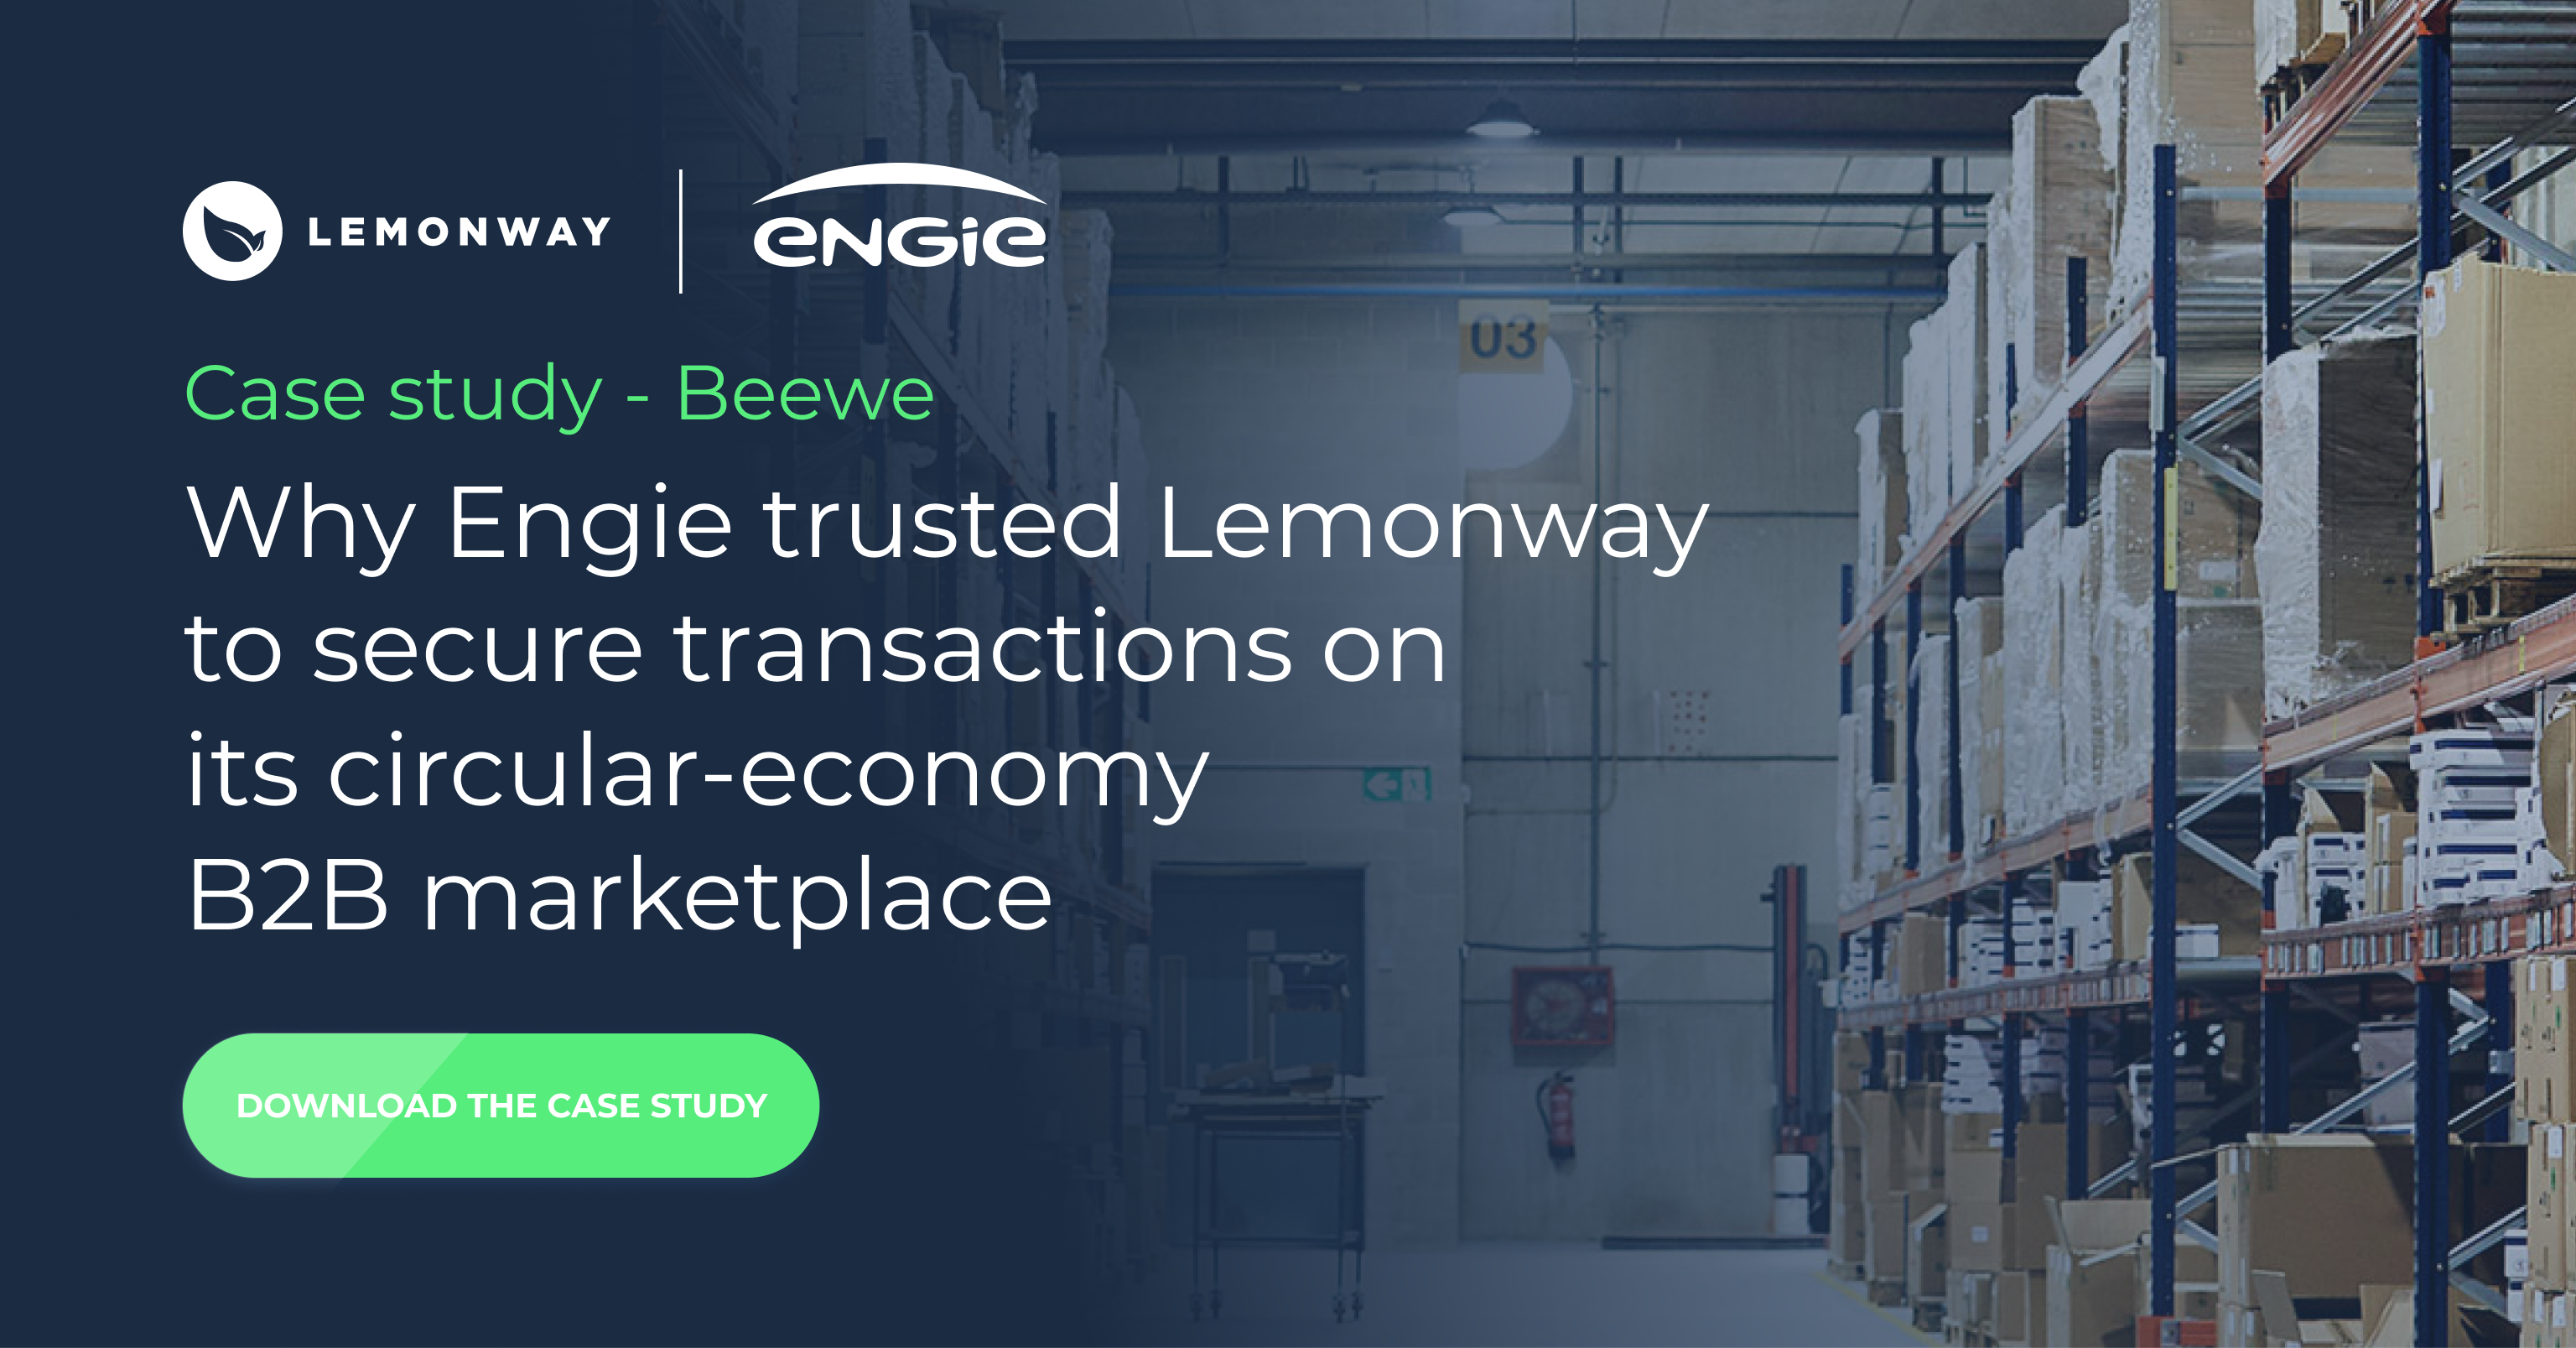 BeeWe - Why Engie trusted Lemonway to secure transactions on its circular-economy B2B marketplace